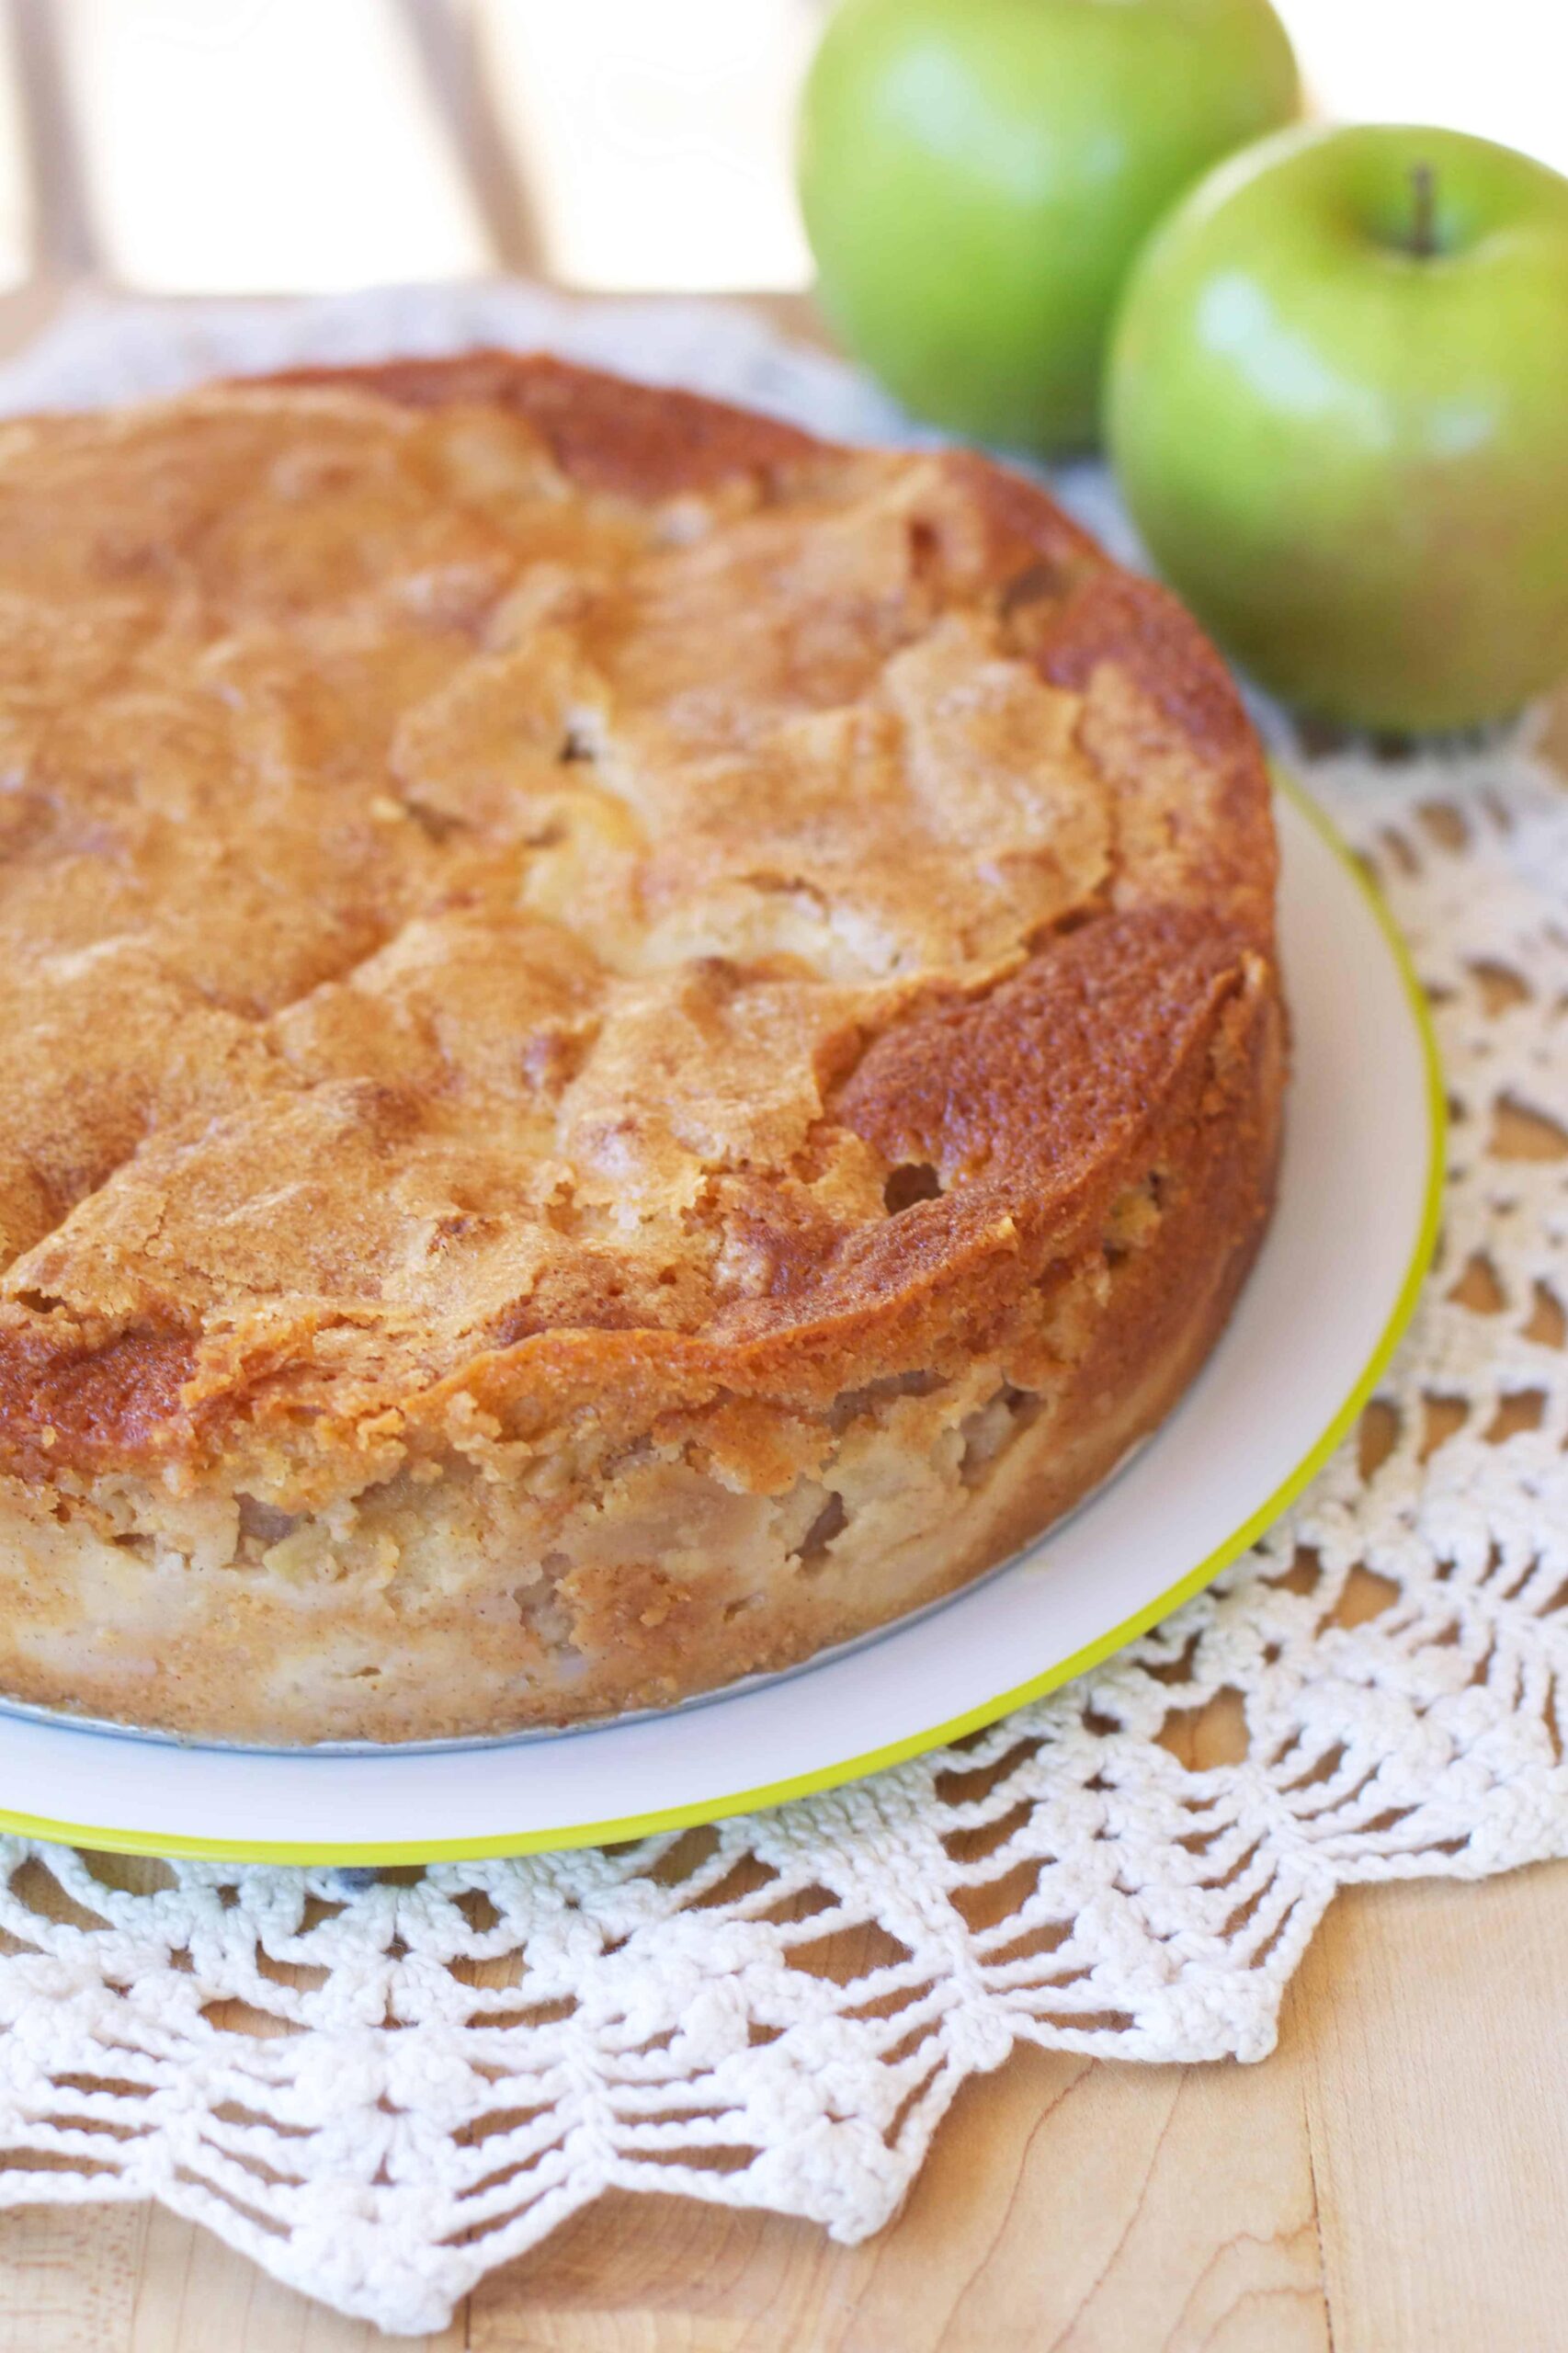  No better way to start your day than with this Apple Custard Coffee Cake.